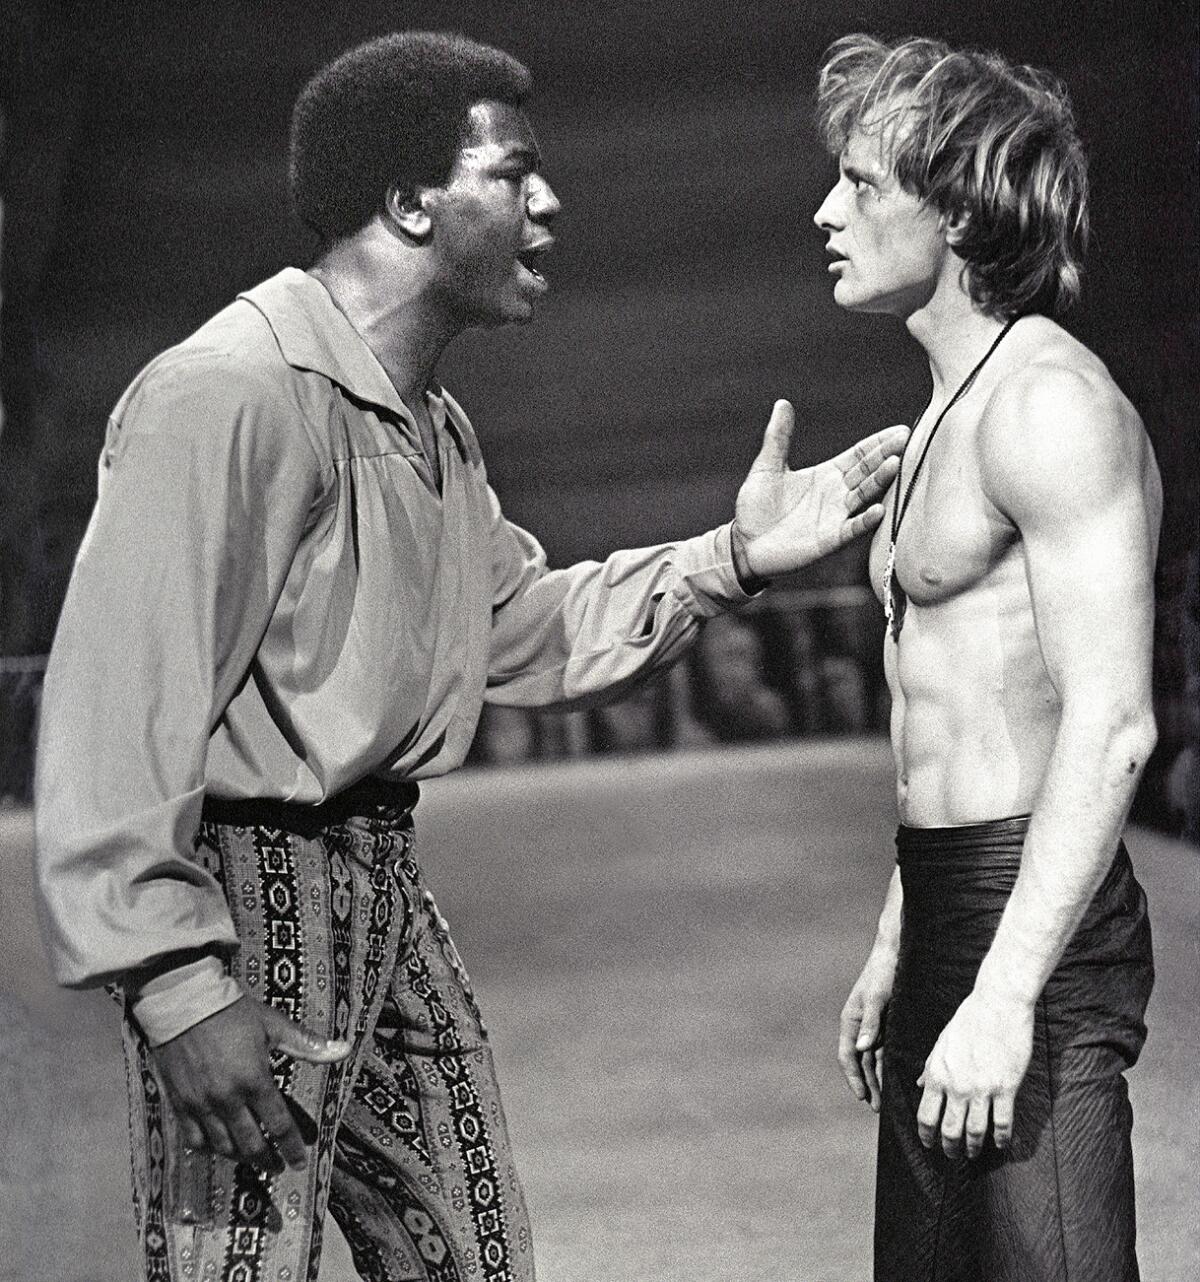 Carl Weathers balanced college football at San Diego State with acting roles like this as a theater arts major.